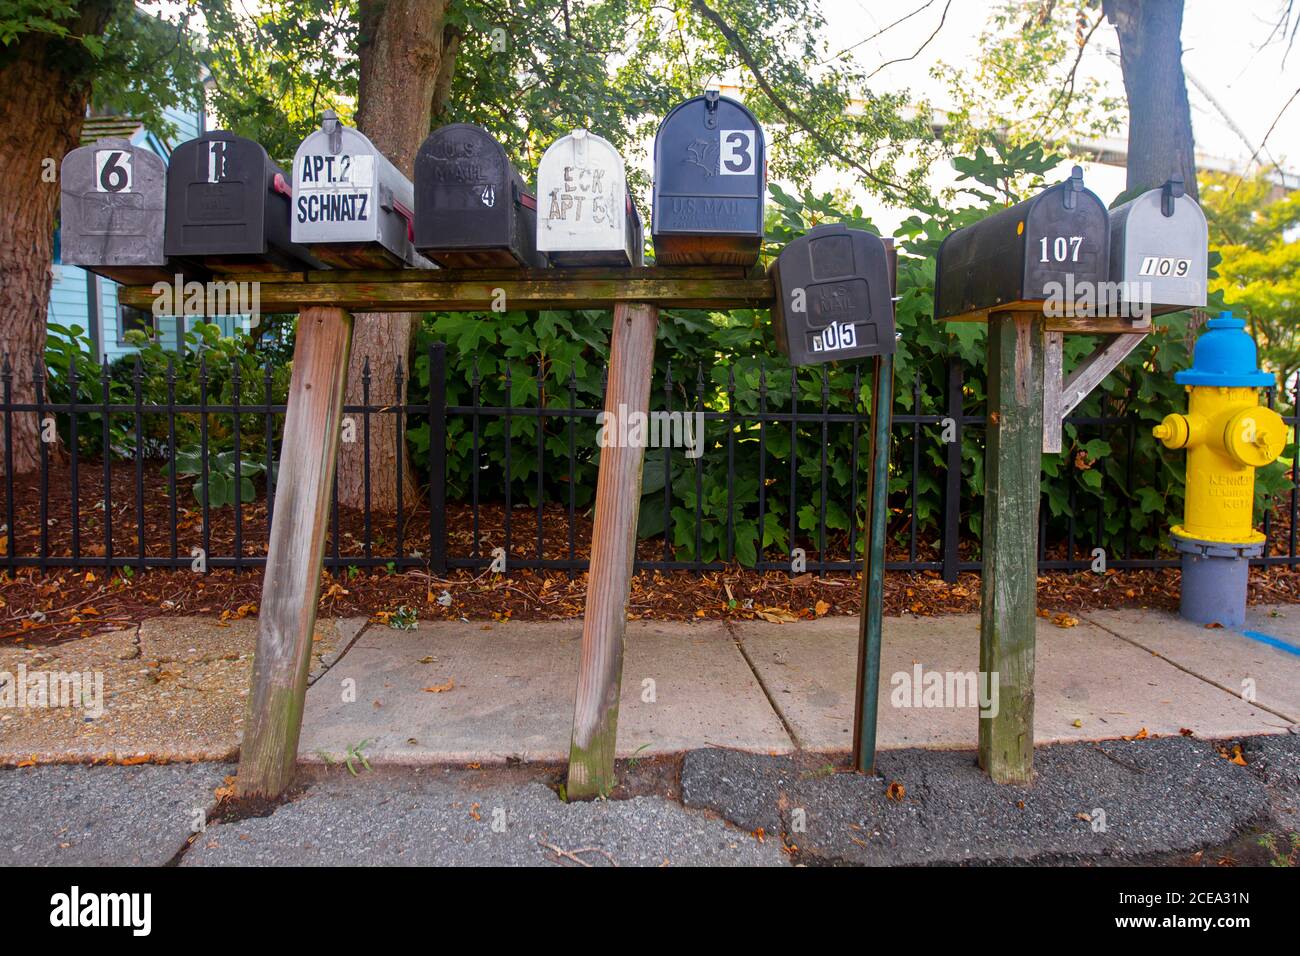 Chesapeake City, MD, USA 08/26/2020: A close up wide angle image of a group of vintage galvanized metal mail boxes on wooden posts. They all have hous Stock Photo